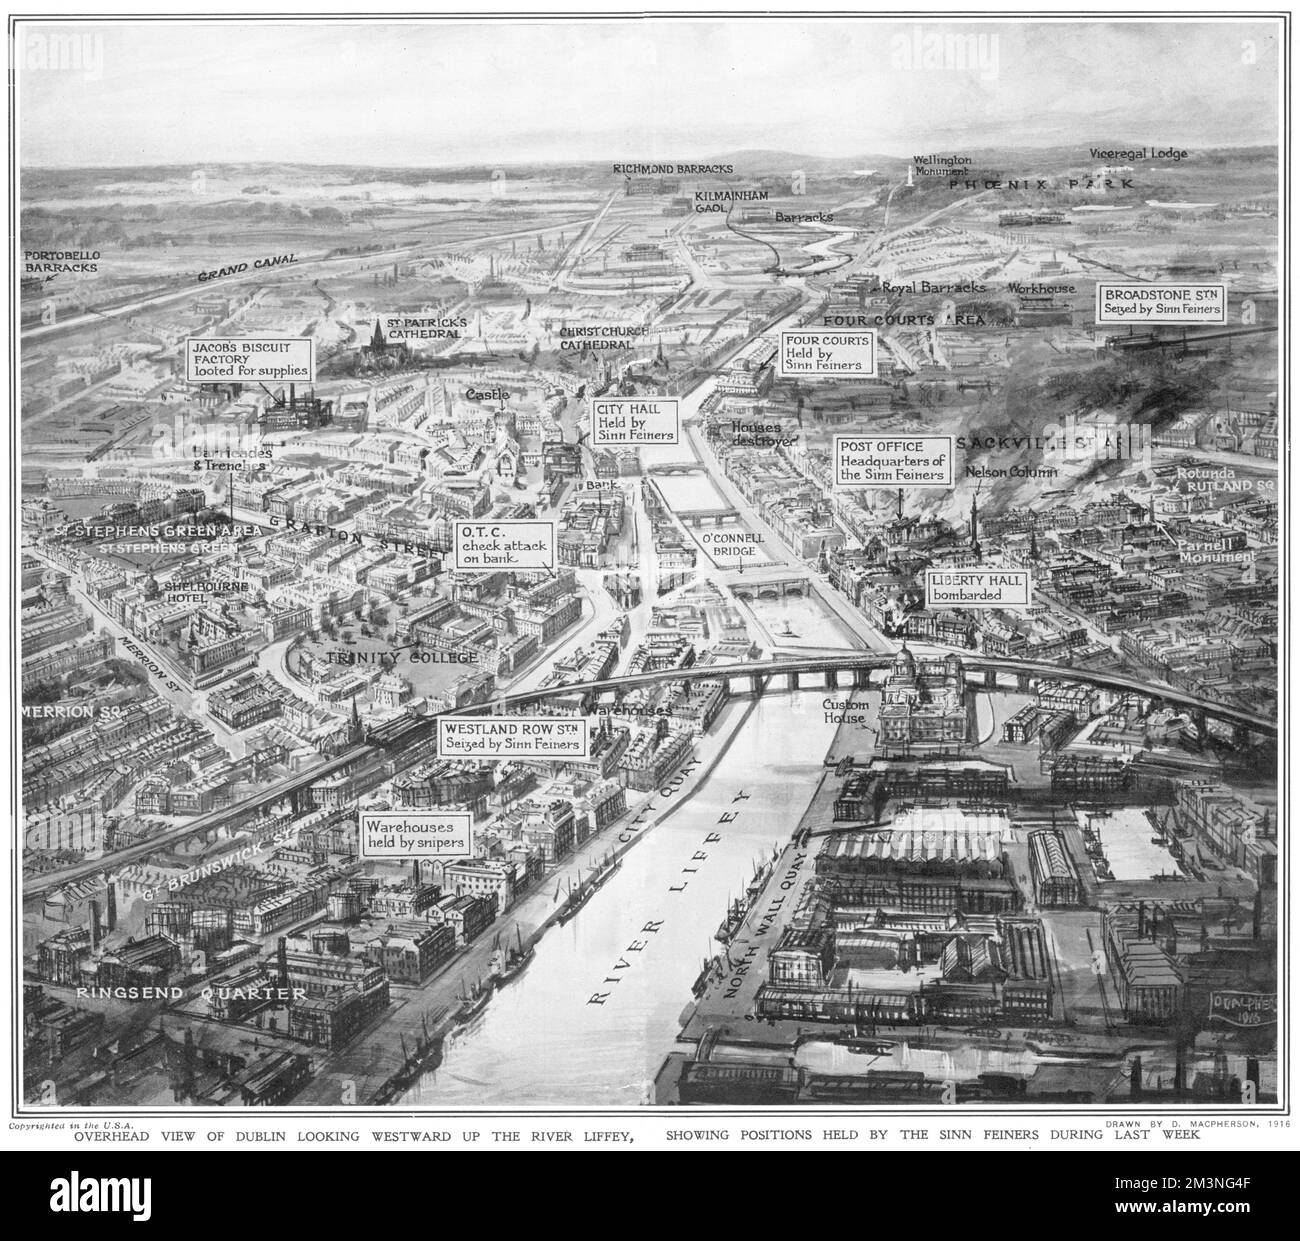 A bird's eye view of Dublin looking westward up the River Liffey, showing positions held by the Sinn Feiners during the Easter Rising in April 1916     Date: 1916 Stock Photo